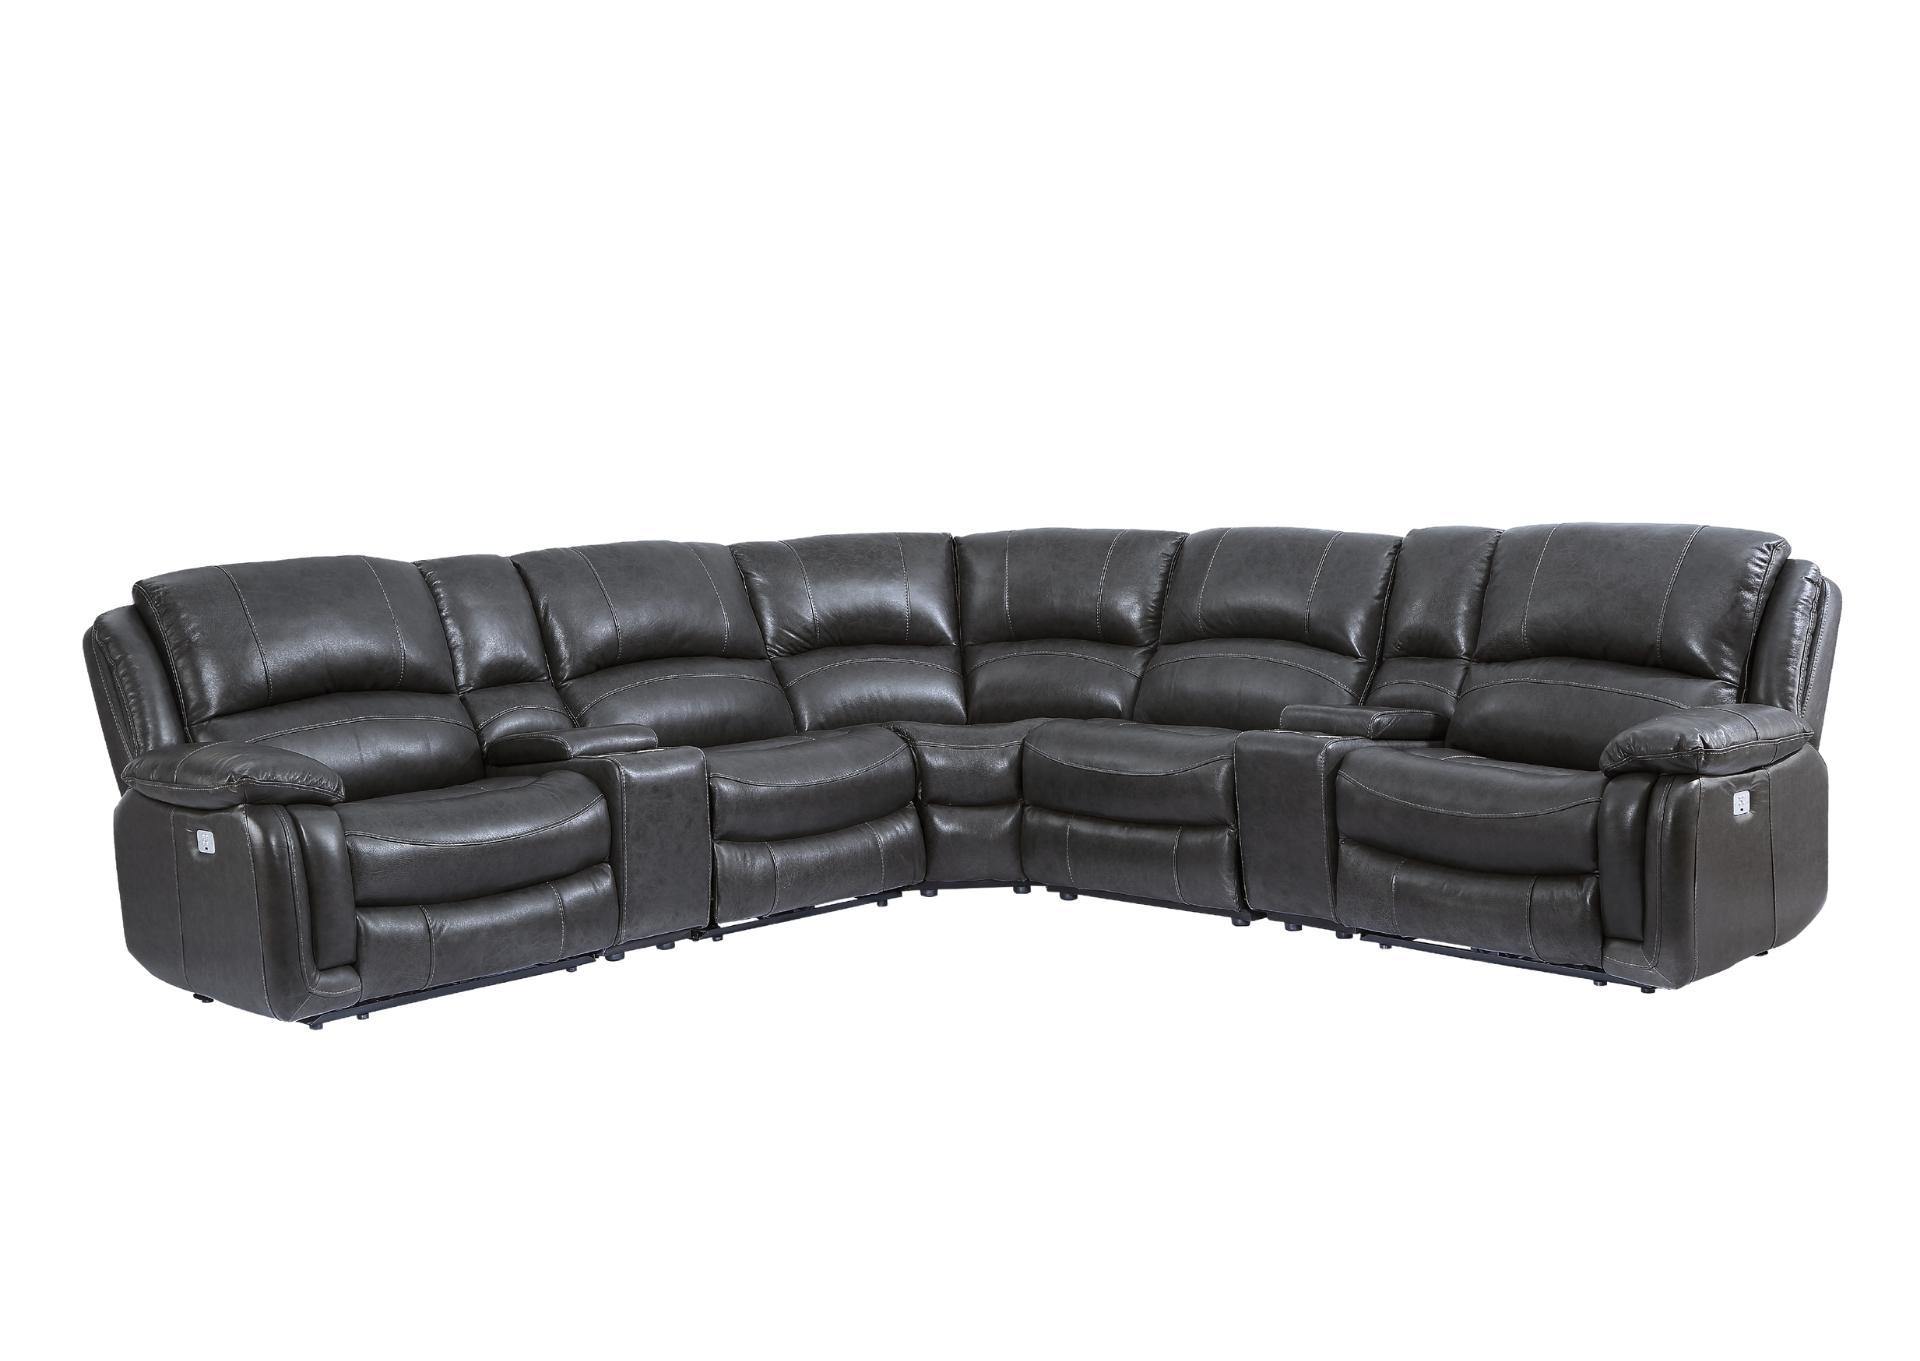 DENVERS 7 PIECE CHARCOAL LEATHER SECTIONAL,STEVE SILVER COMPANY